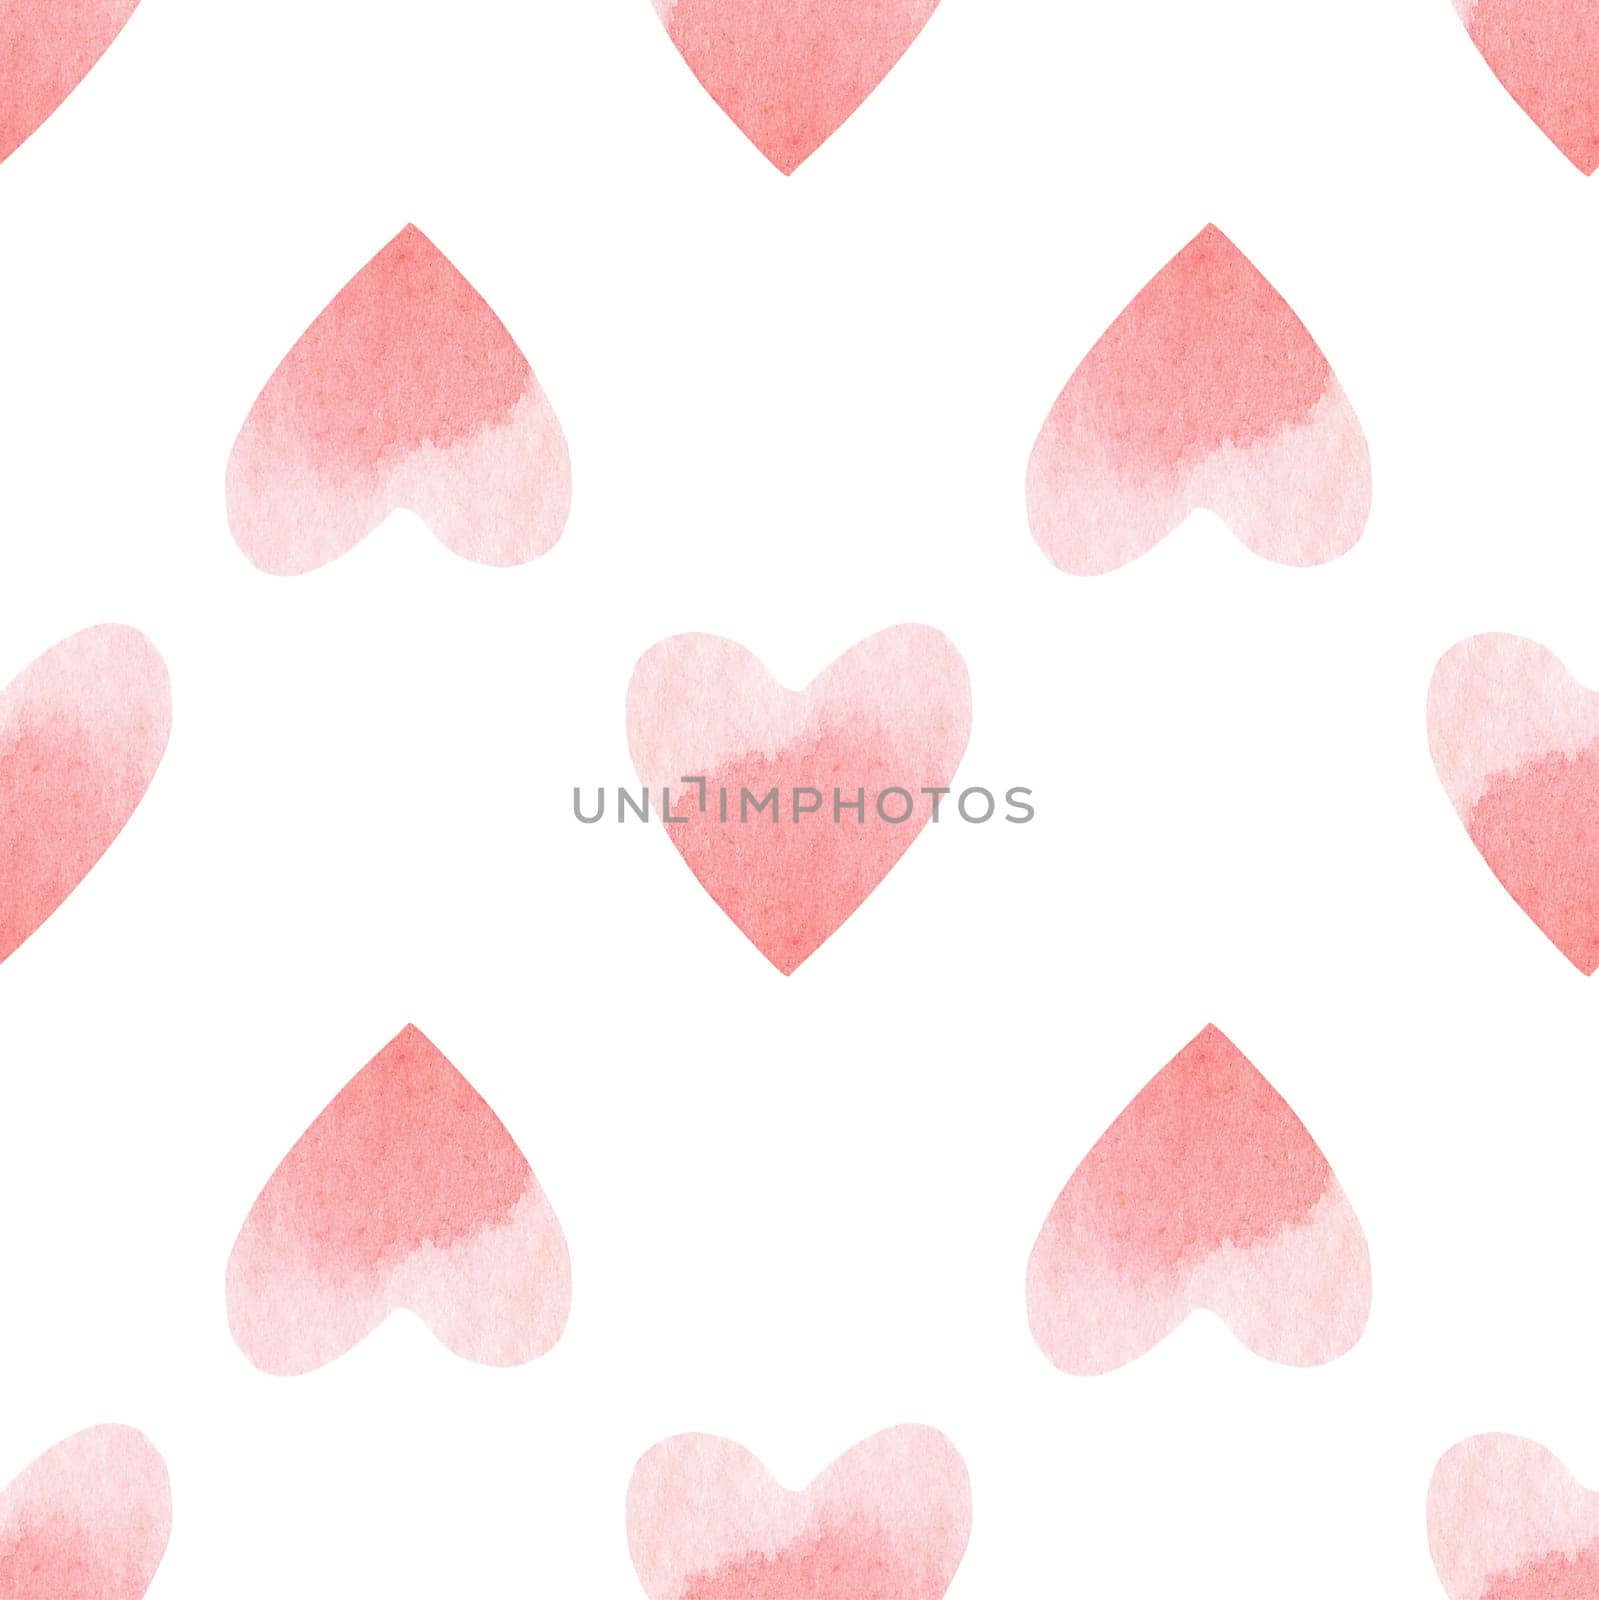 Seamless pattern with bright pink hand painted watercolor hearts. Romantic decorative background perfect for Valentine's day gift paper, wedding decor or fabric by Anny_Sketches